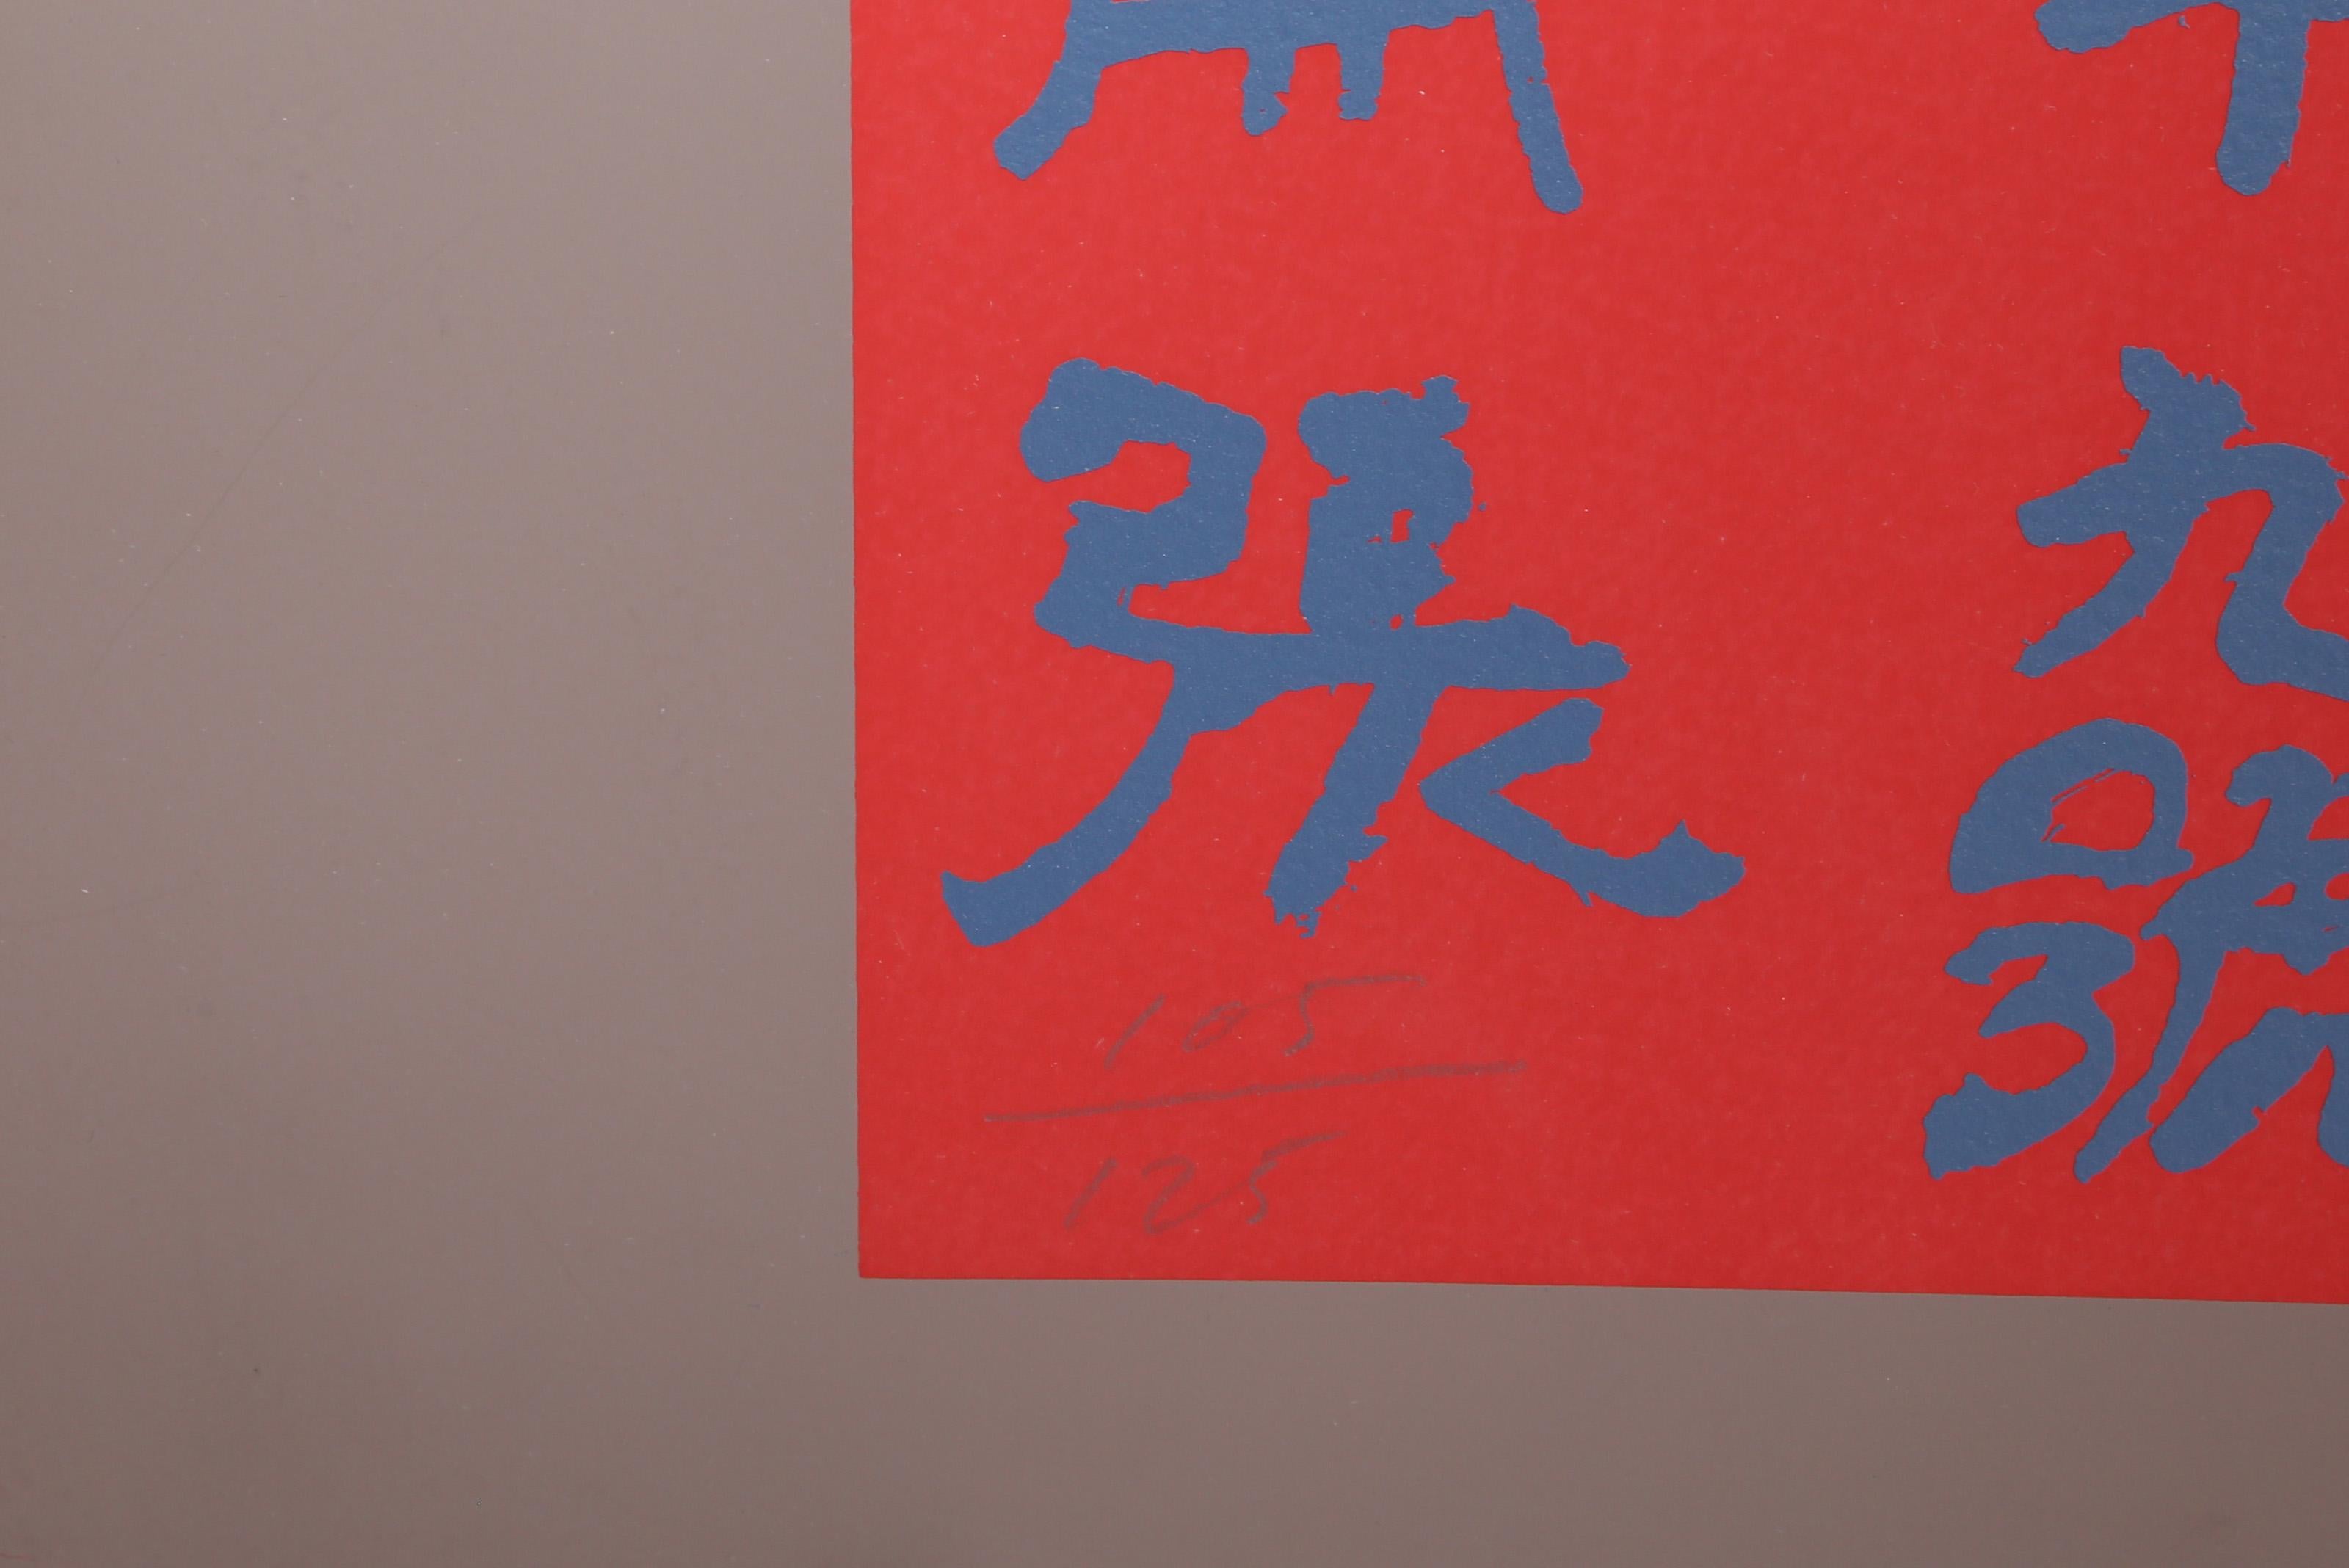 Untitled - Chinese Characters (Red on Mauve)
Chryssa, Greek (1933–2013)
Date: circa 1979
Screenprint, signed and numbered in pencil
Edition of 125
Size: 30 x 22 in. (76.2 x 55.88 cm)